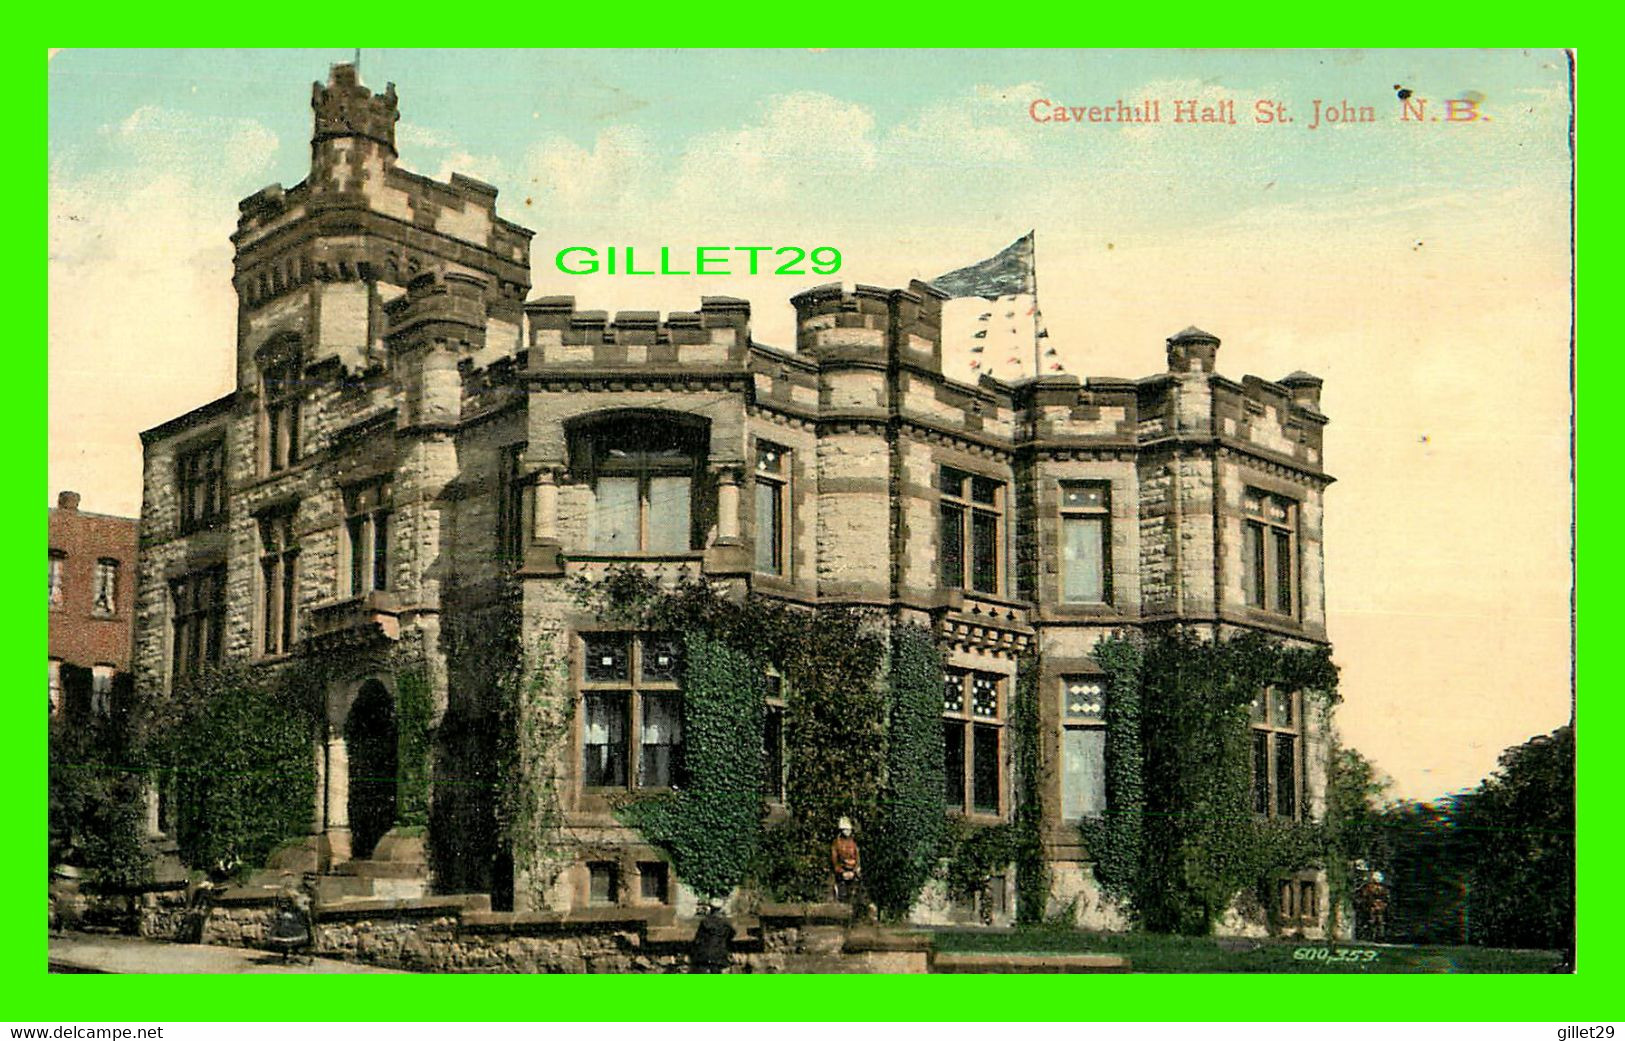 ST JOHN, NB - CAVERHILL HALL - ANIMATED WITH PEOPLES - TRAVEL IN 1908 - J. & A. MILLAN - - St. John